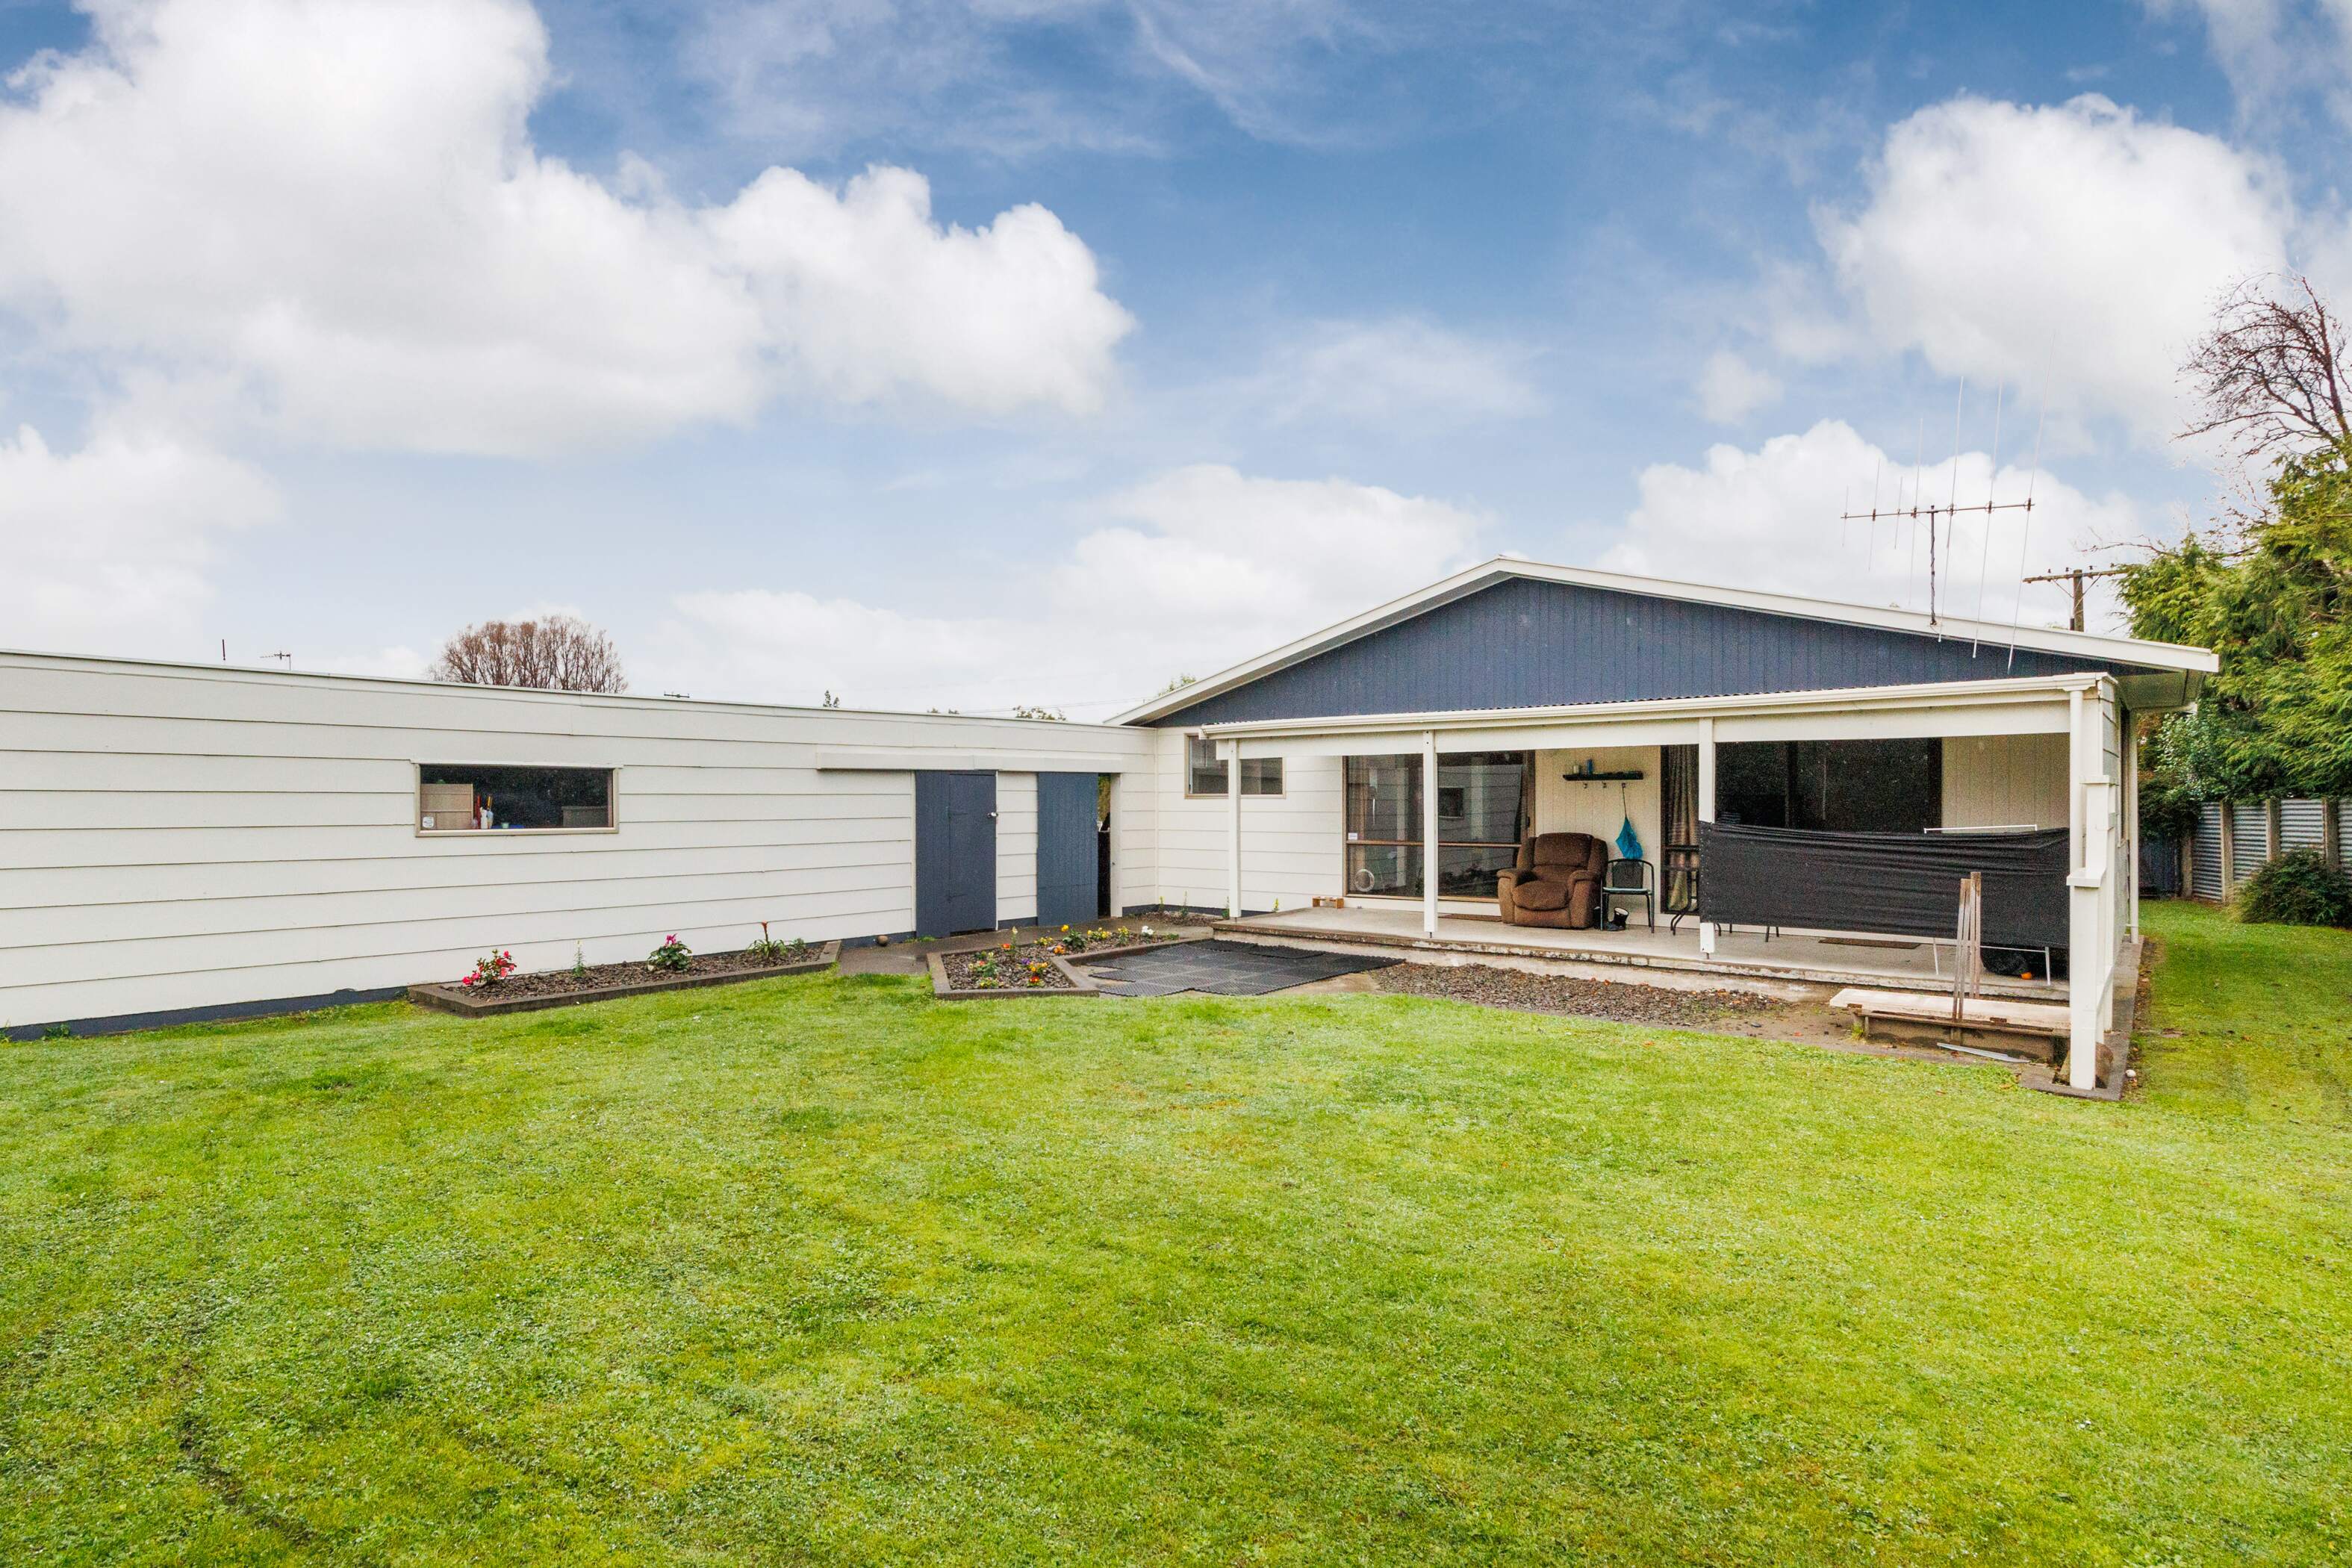 Property Picture: Let's Move to Friendly Feilding